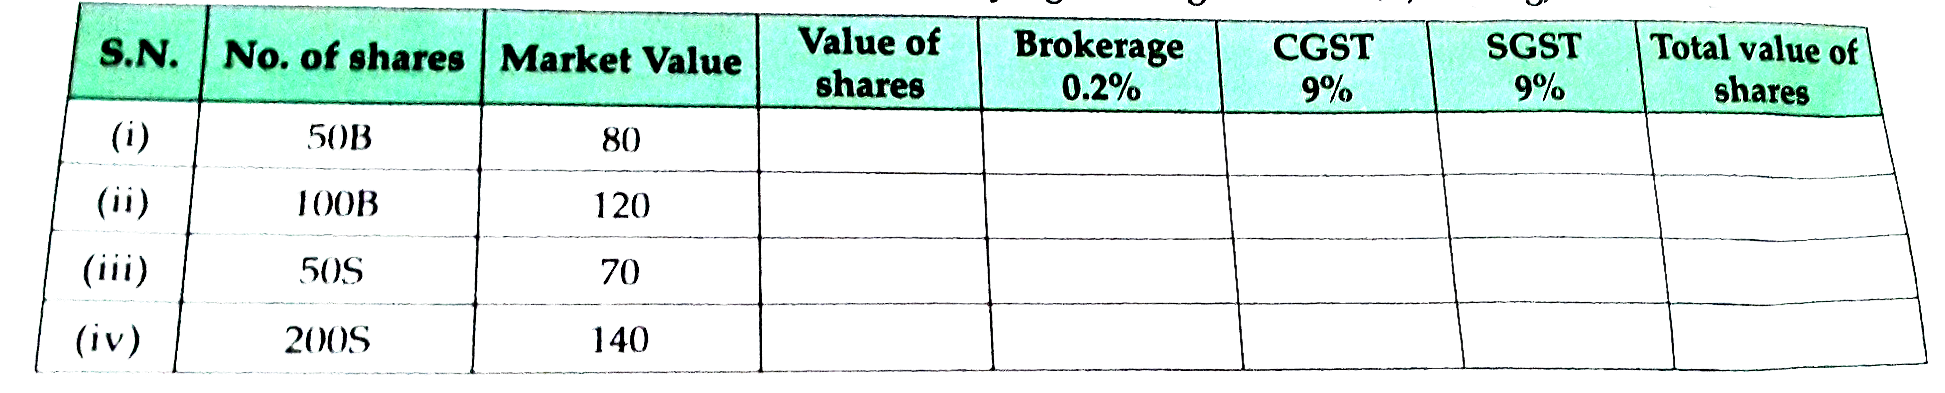 Fill in the blanks in the following yax invoice of buying-selling of share. (B,Buying, S-Selling)